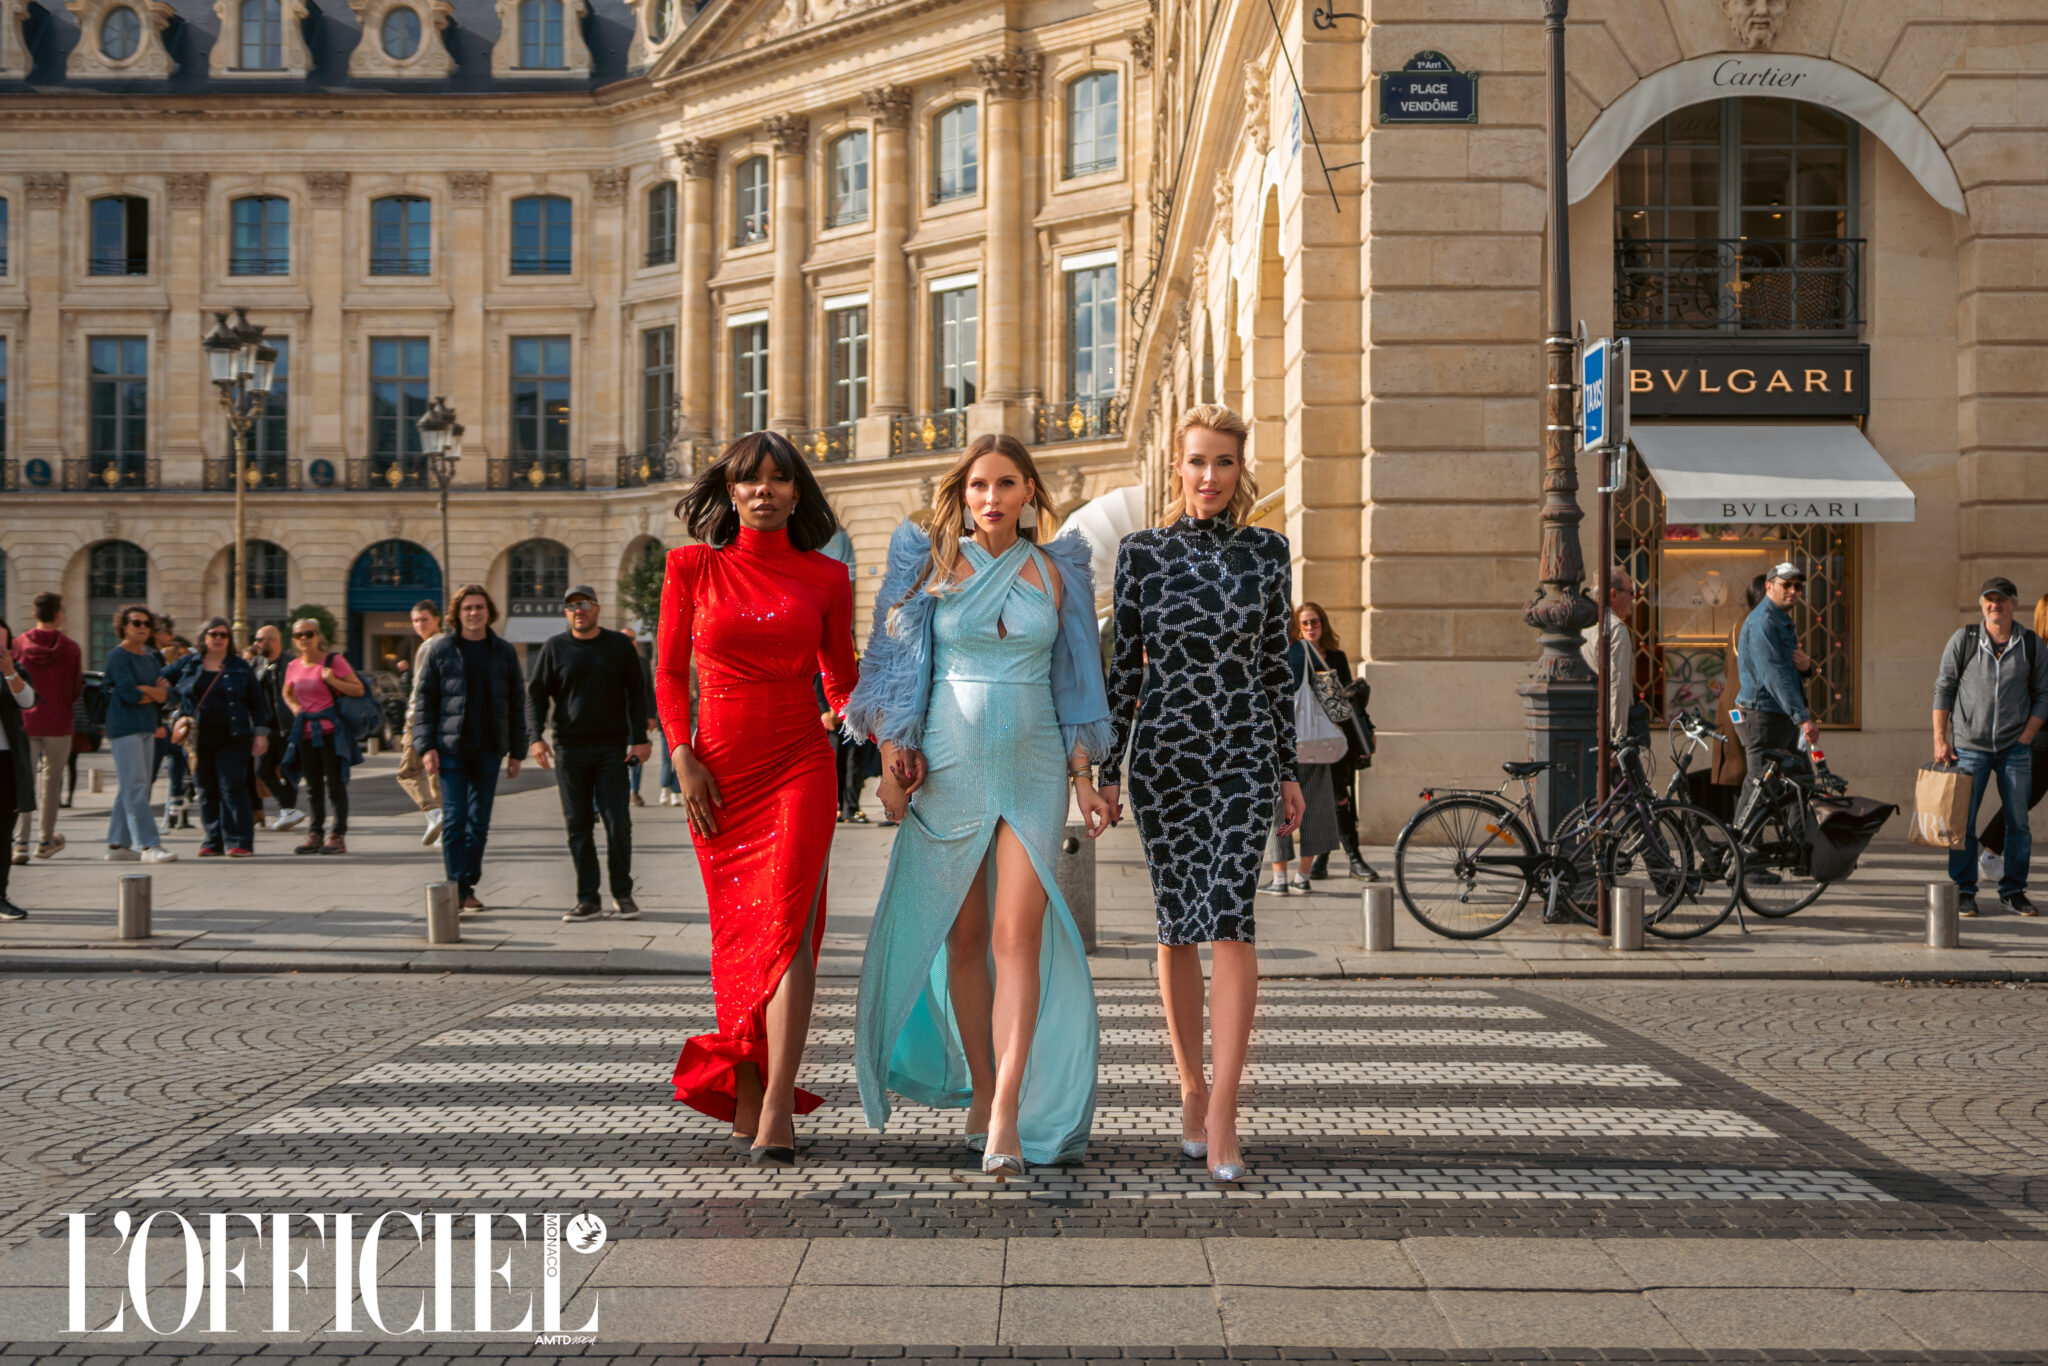 Feature at L'Officiel Monaco during Paris Fashion Week SS 23. Visual Fashion Story from the magical Paris. Featuring: Nicolas Besson, Gemy Maalouf, Charriol, Sol Angelann and more. 10